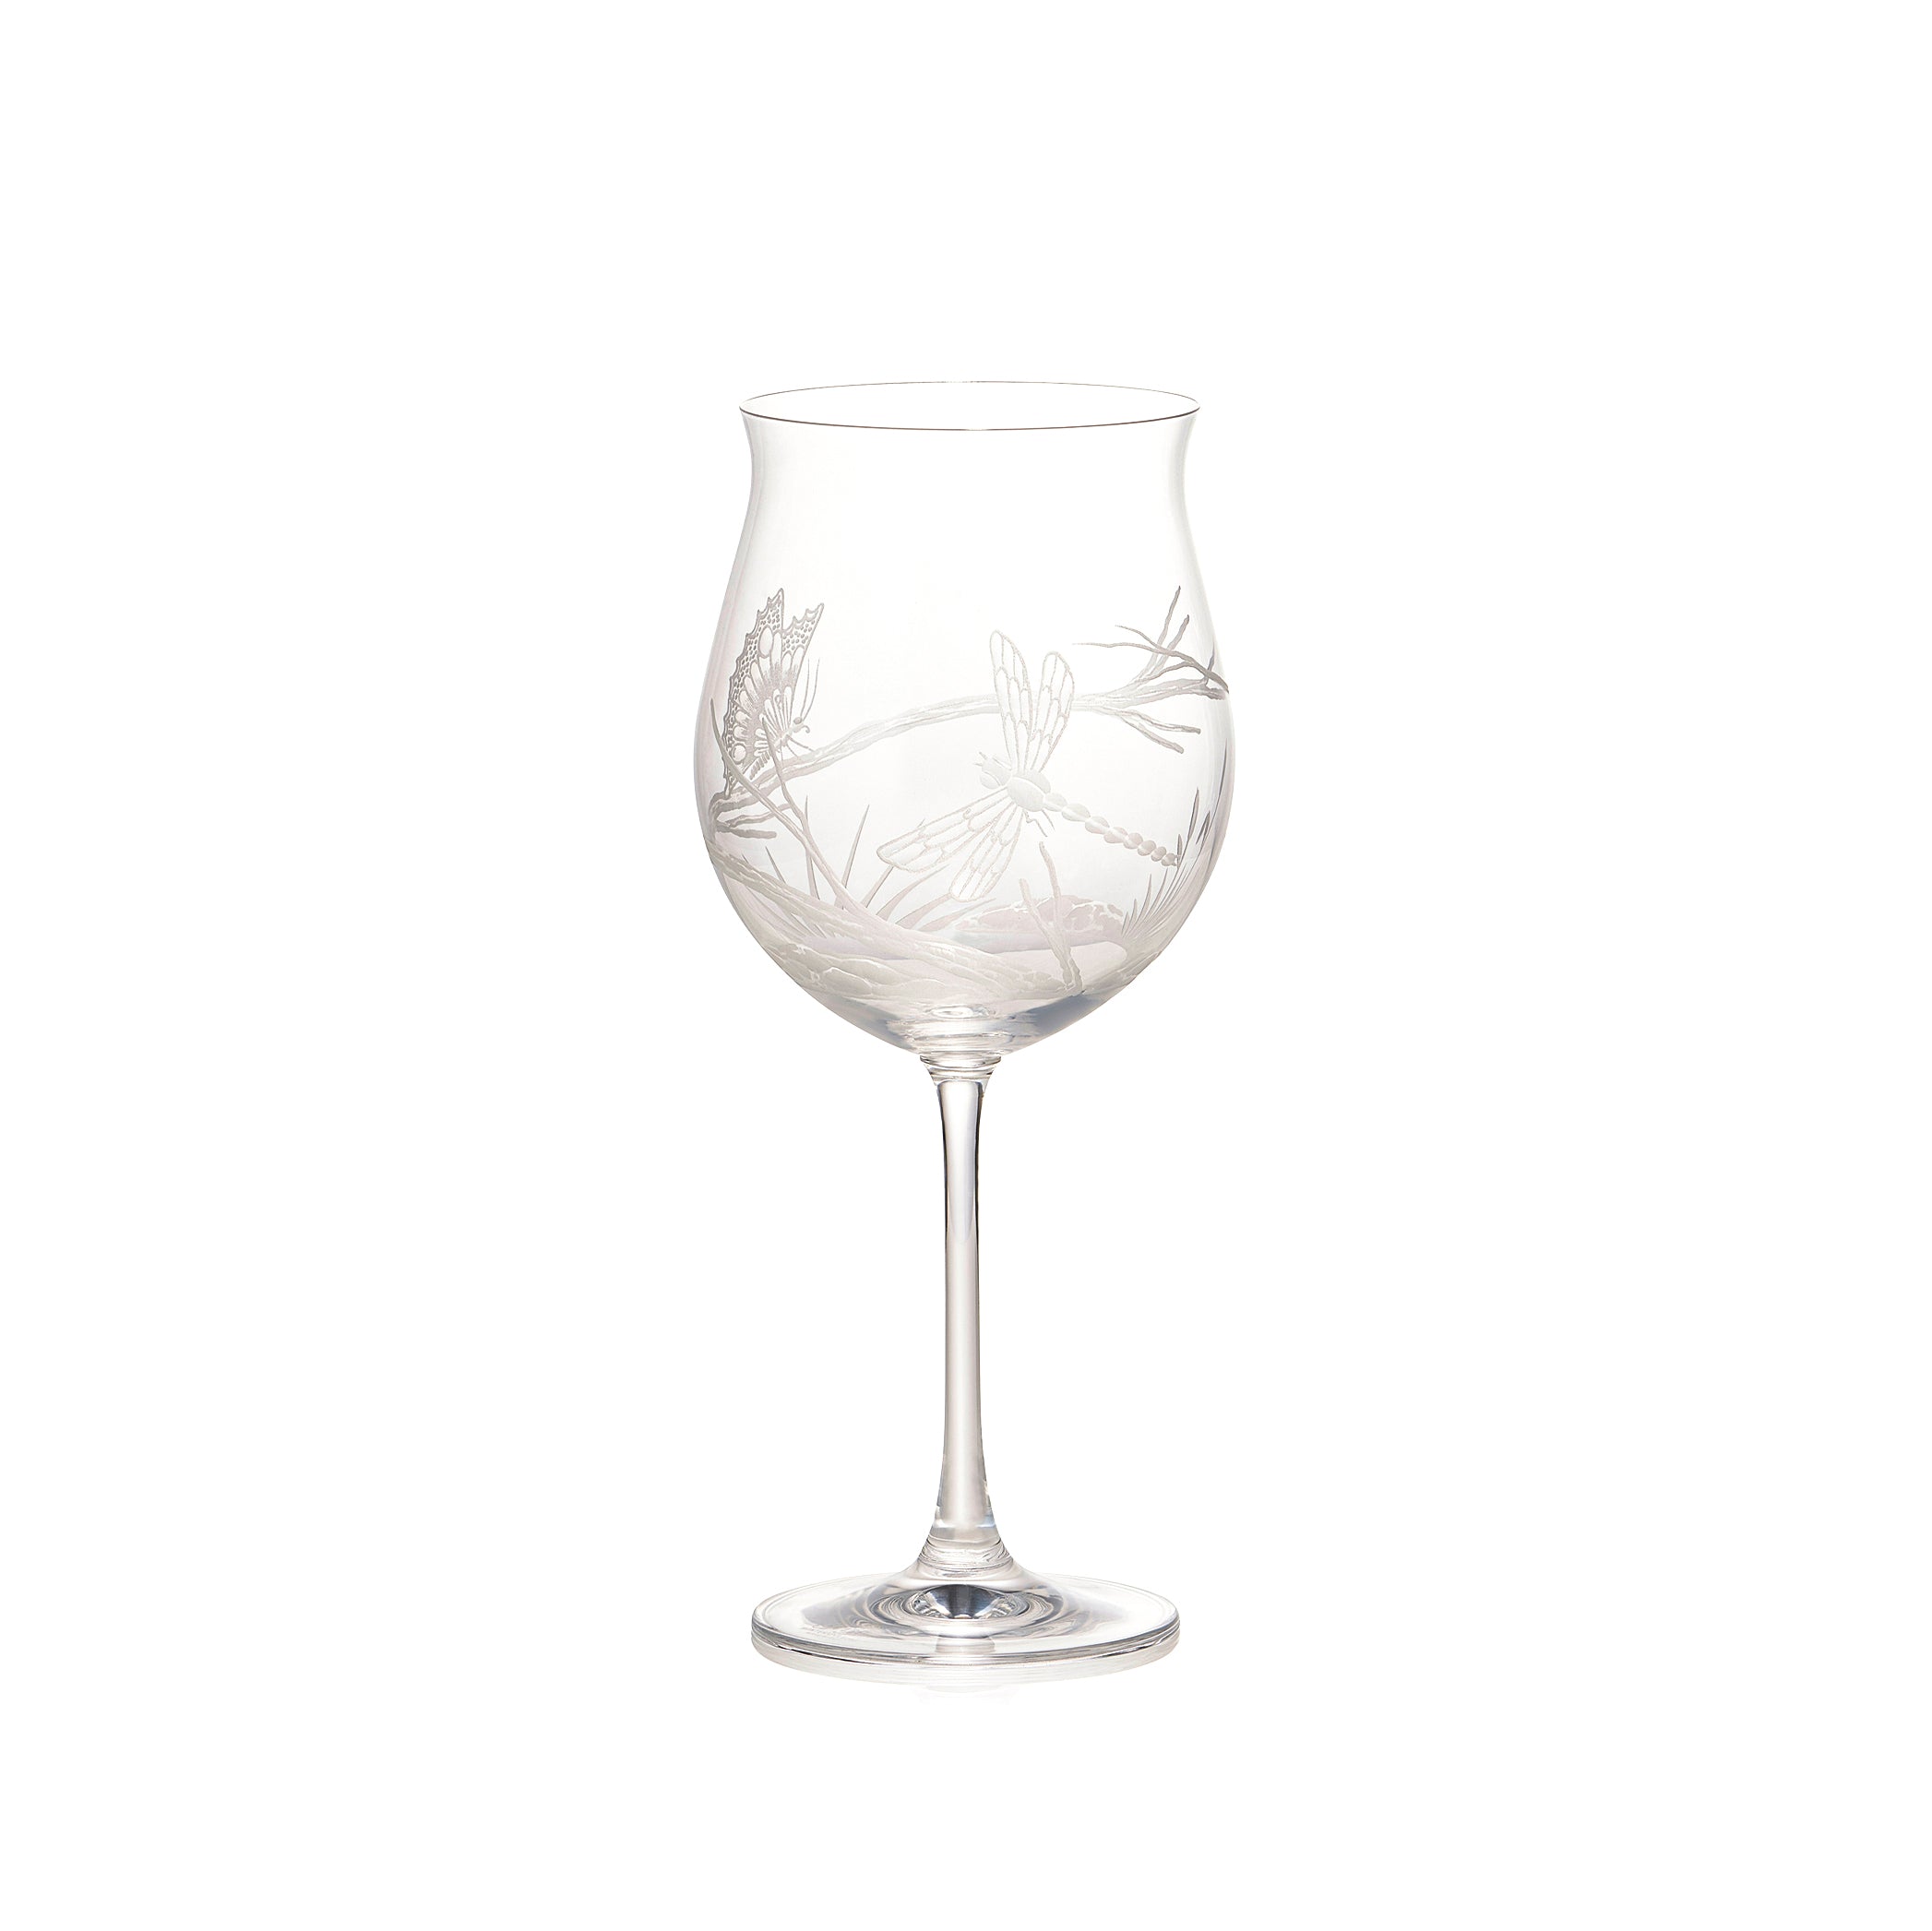 Dragonfly Engraved White Wine Glass, 23.5cm